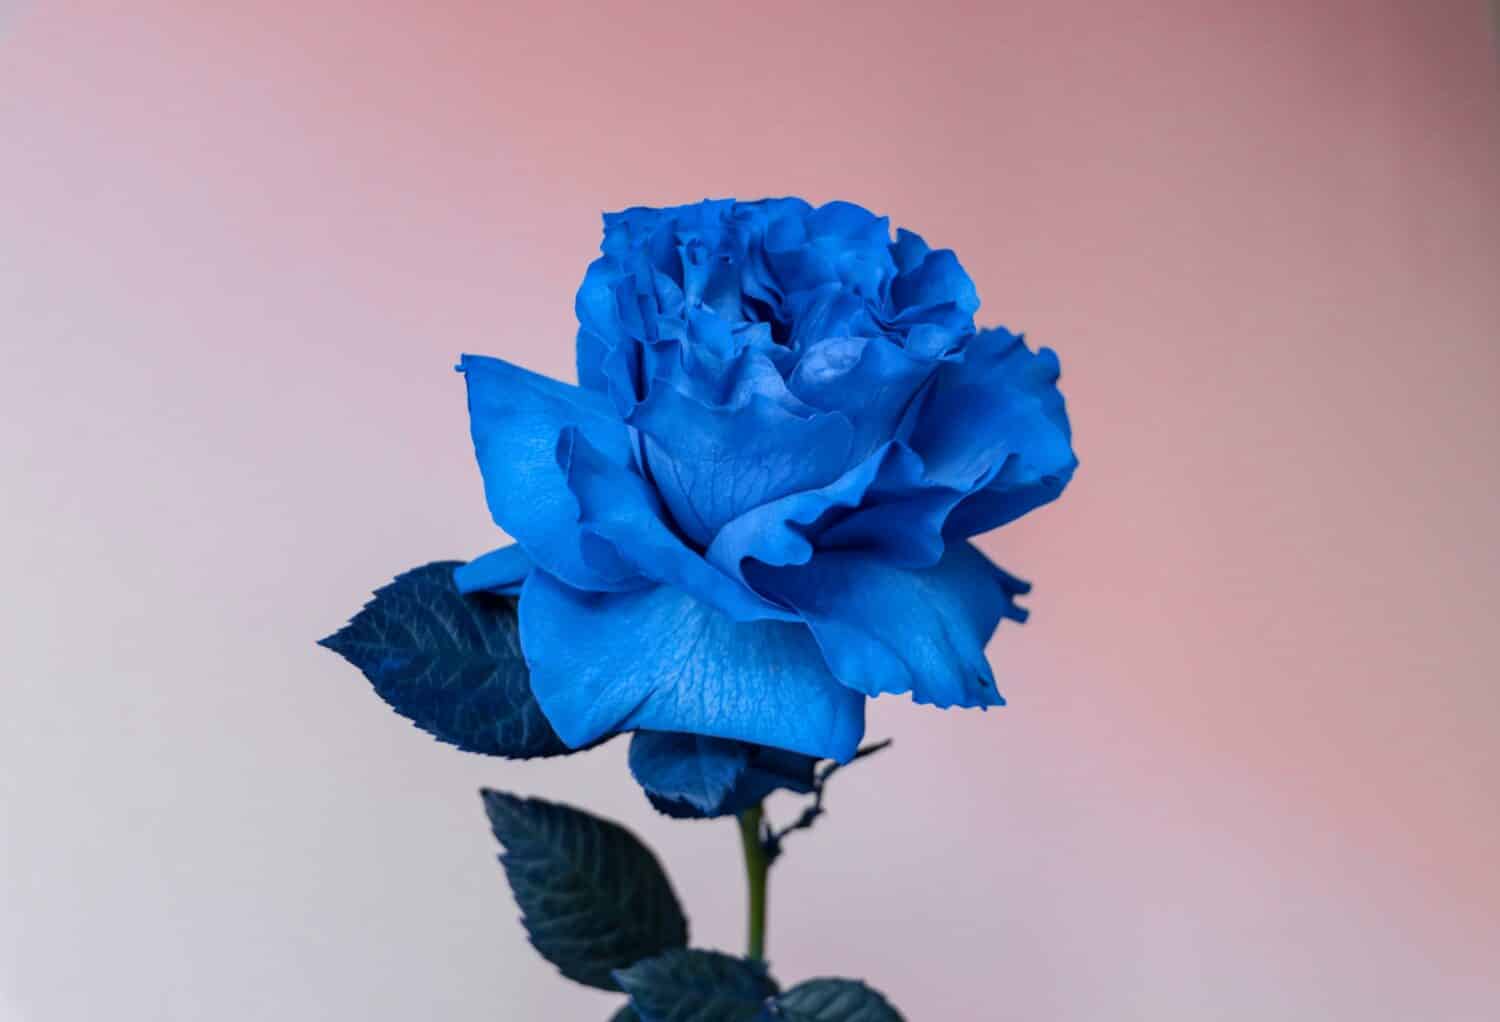 Blue rose close-up on a pink background